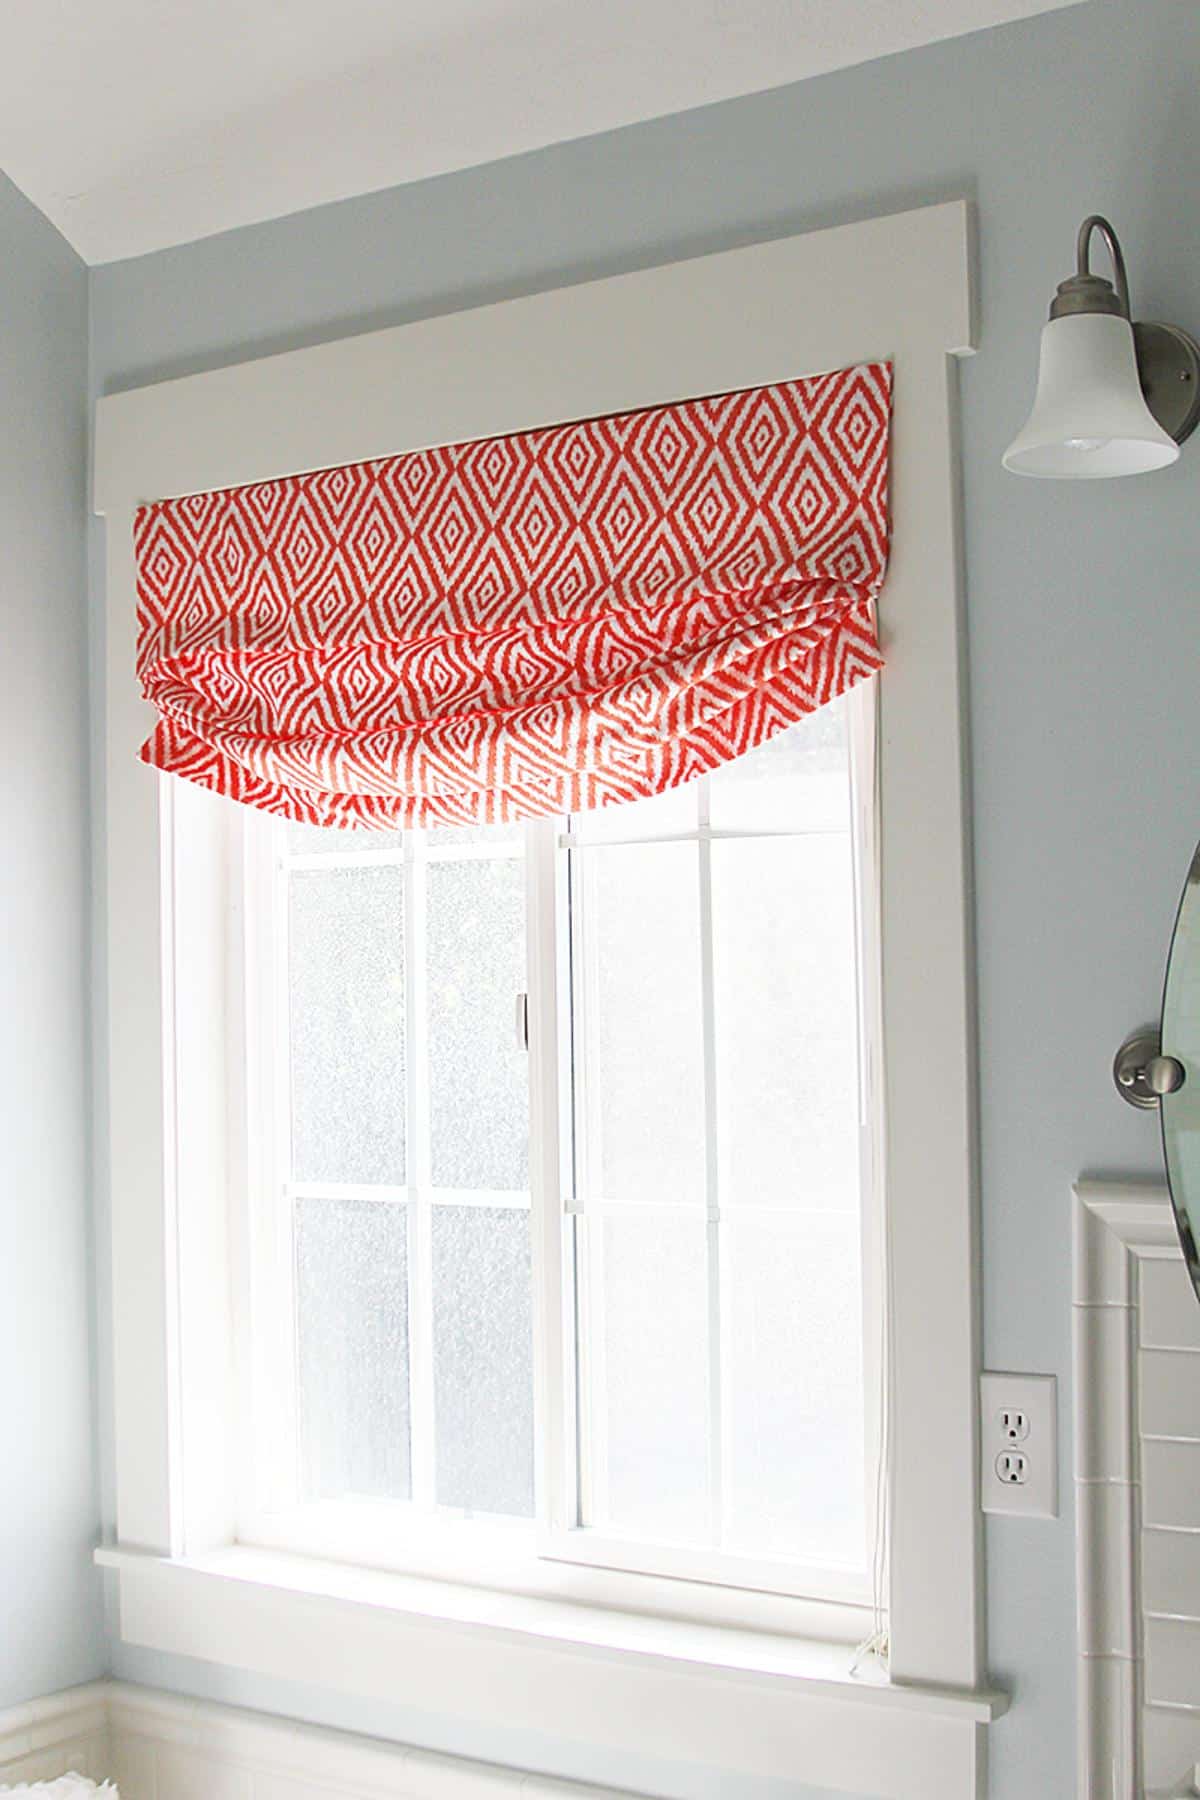 DIY Faux Relaxed Roman Shade